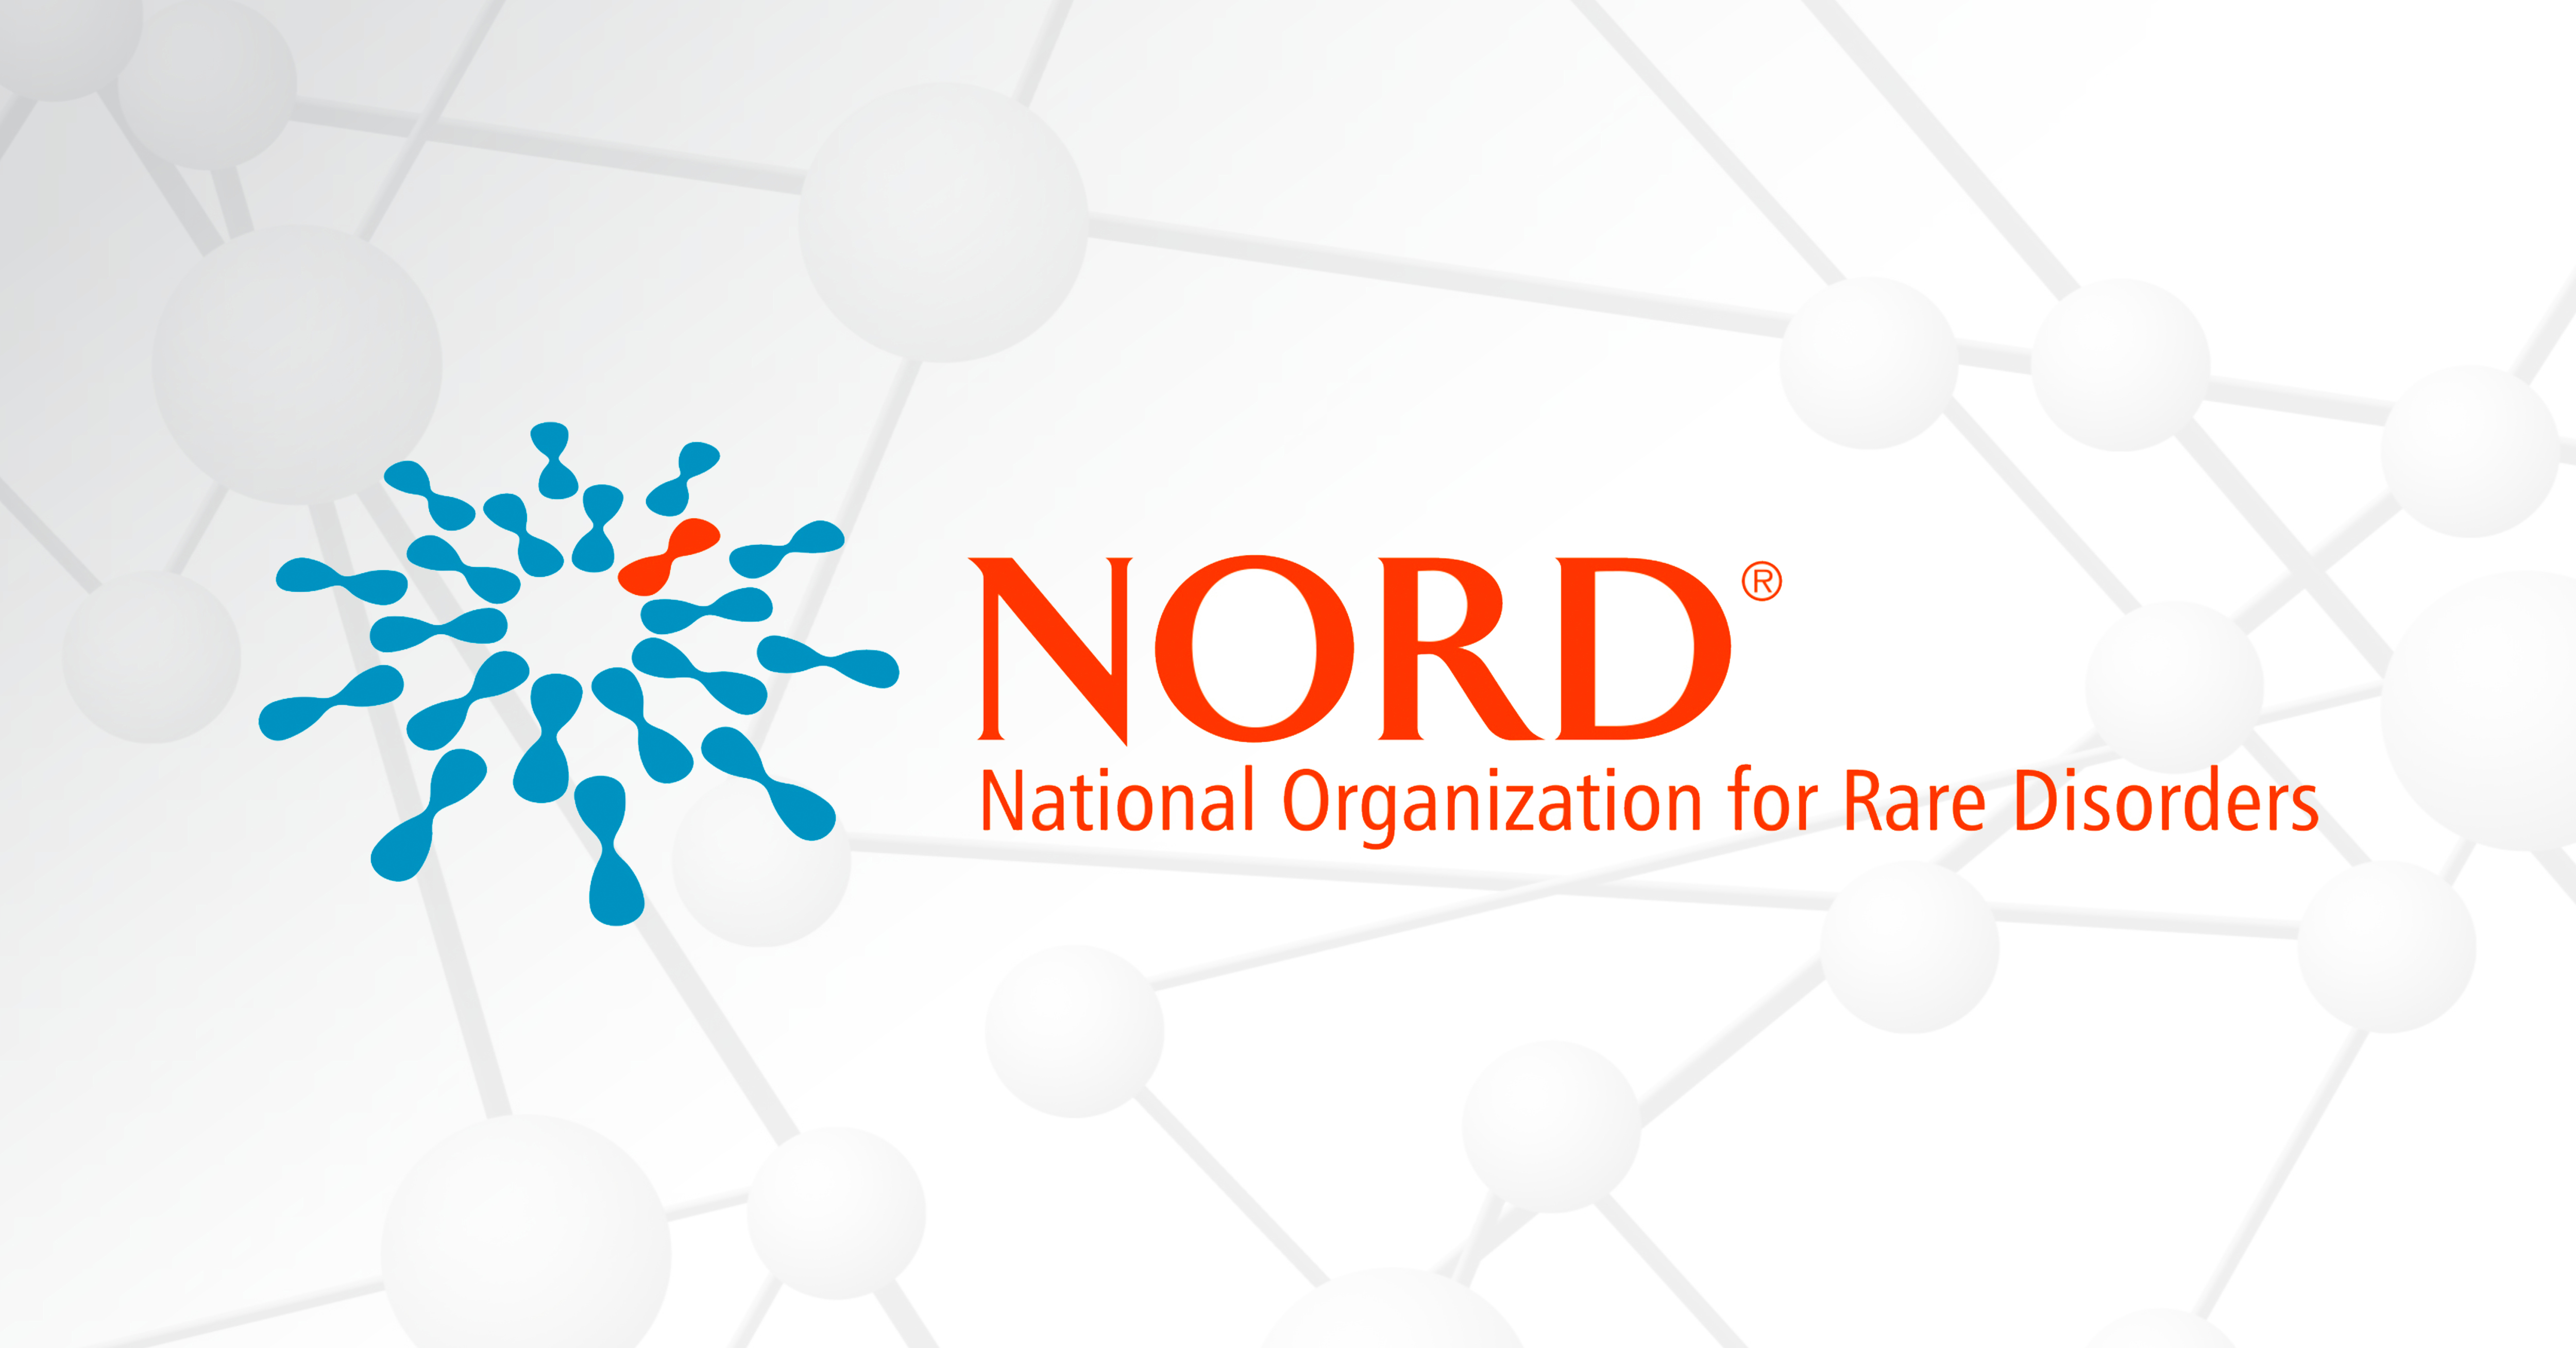 The national organization for rare disorders (NORD) logo appears over a gray graphic of molecules